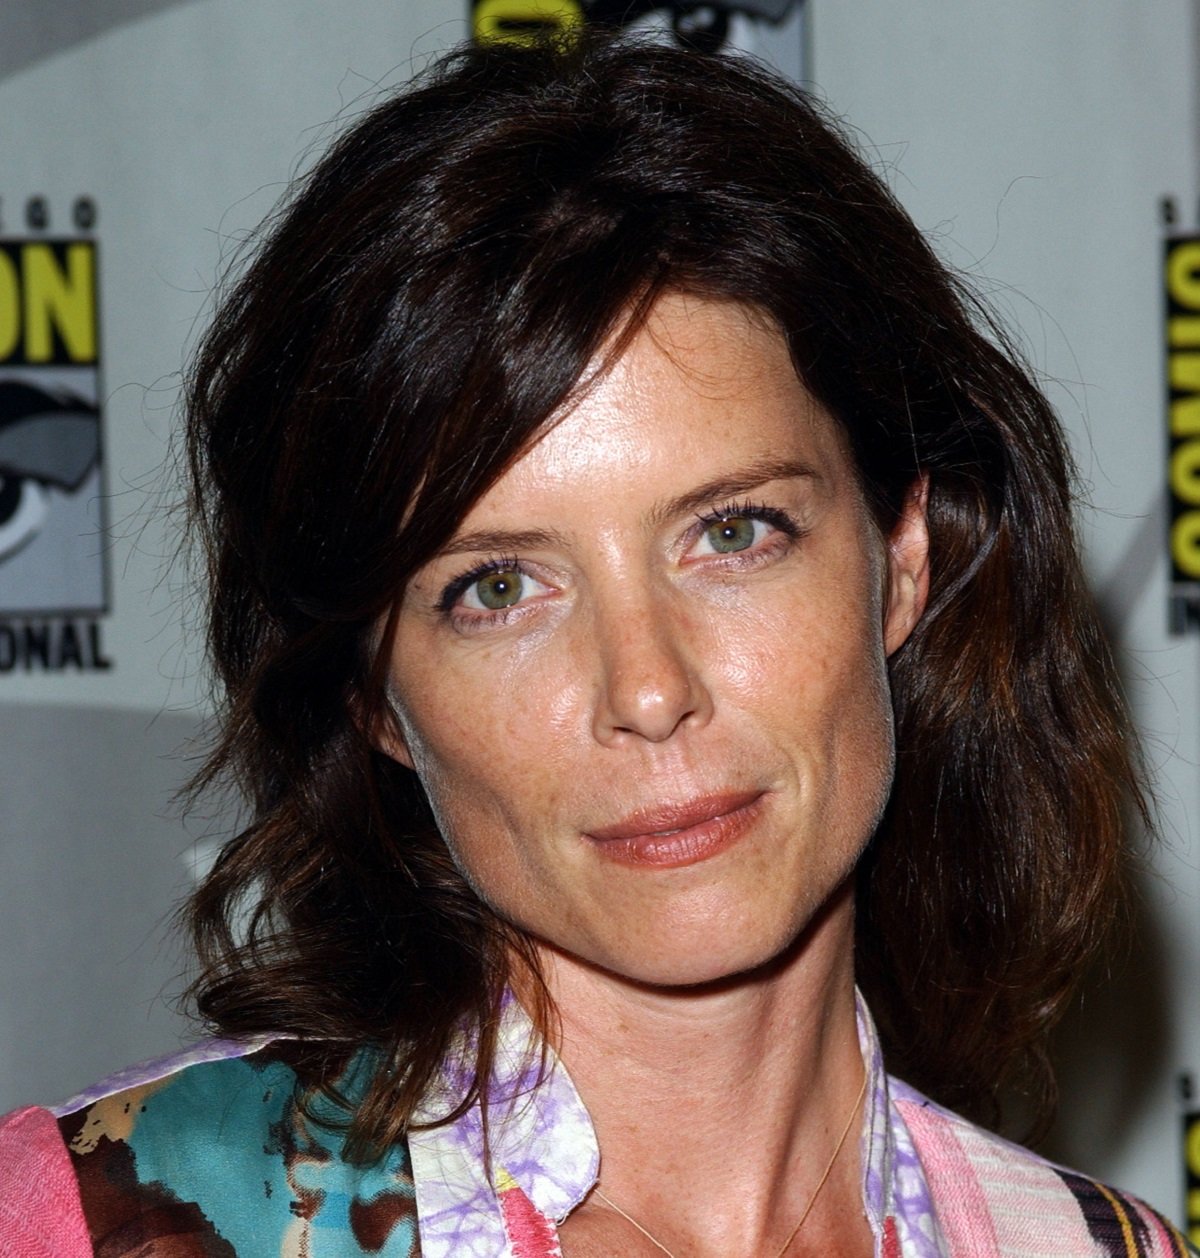 Torri Higginson smiles and poses for a photograph while at an event.